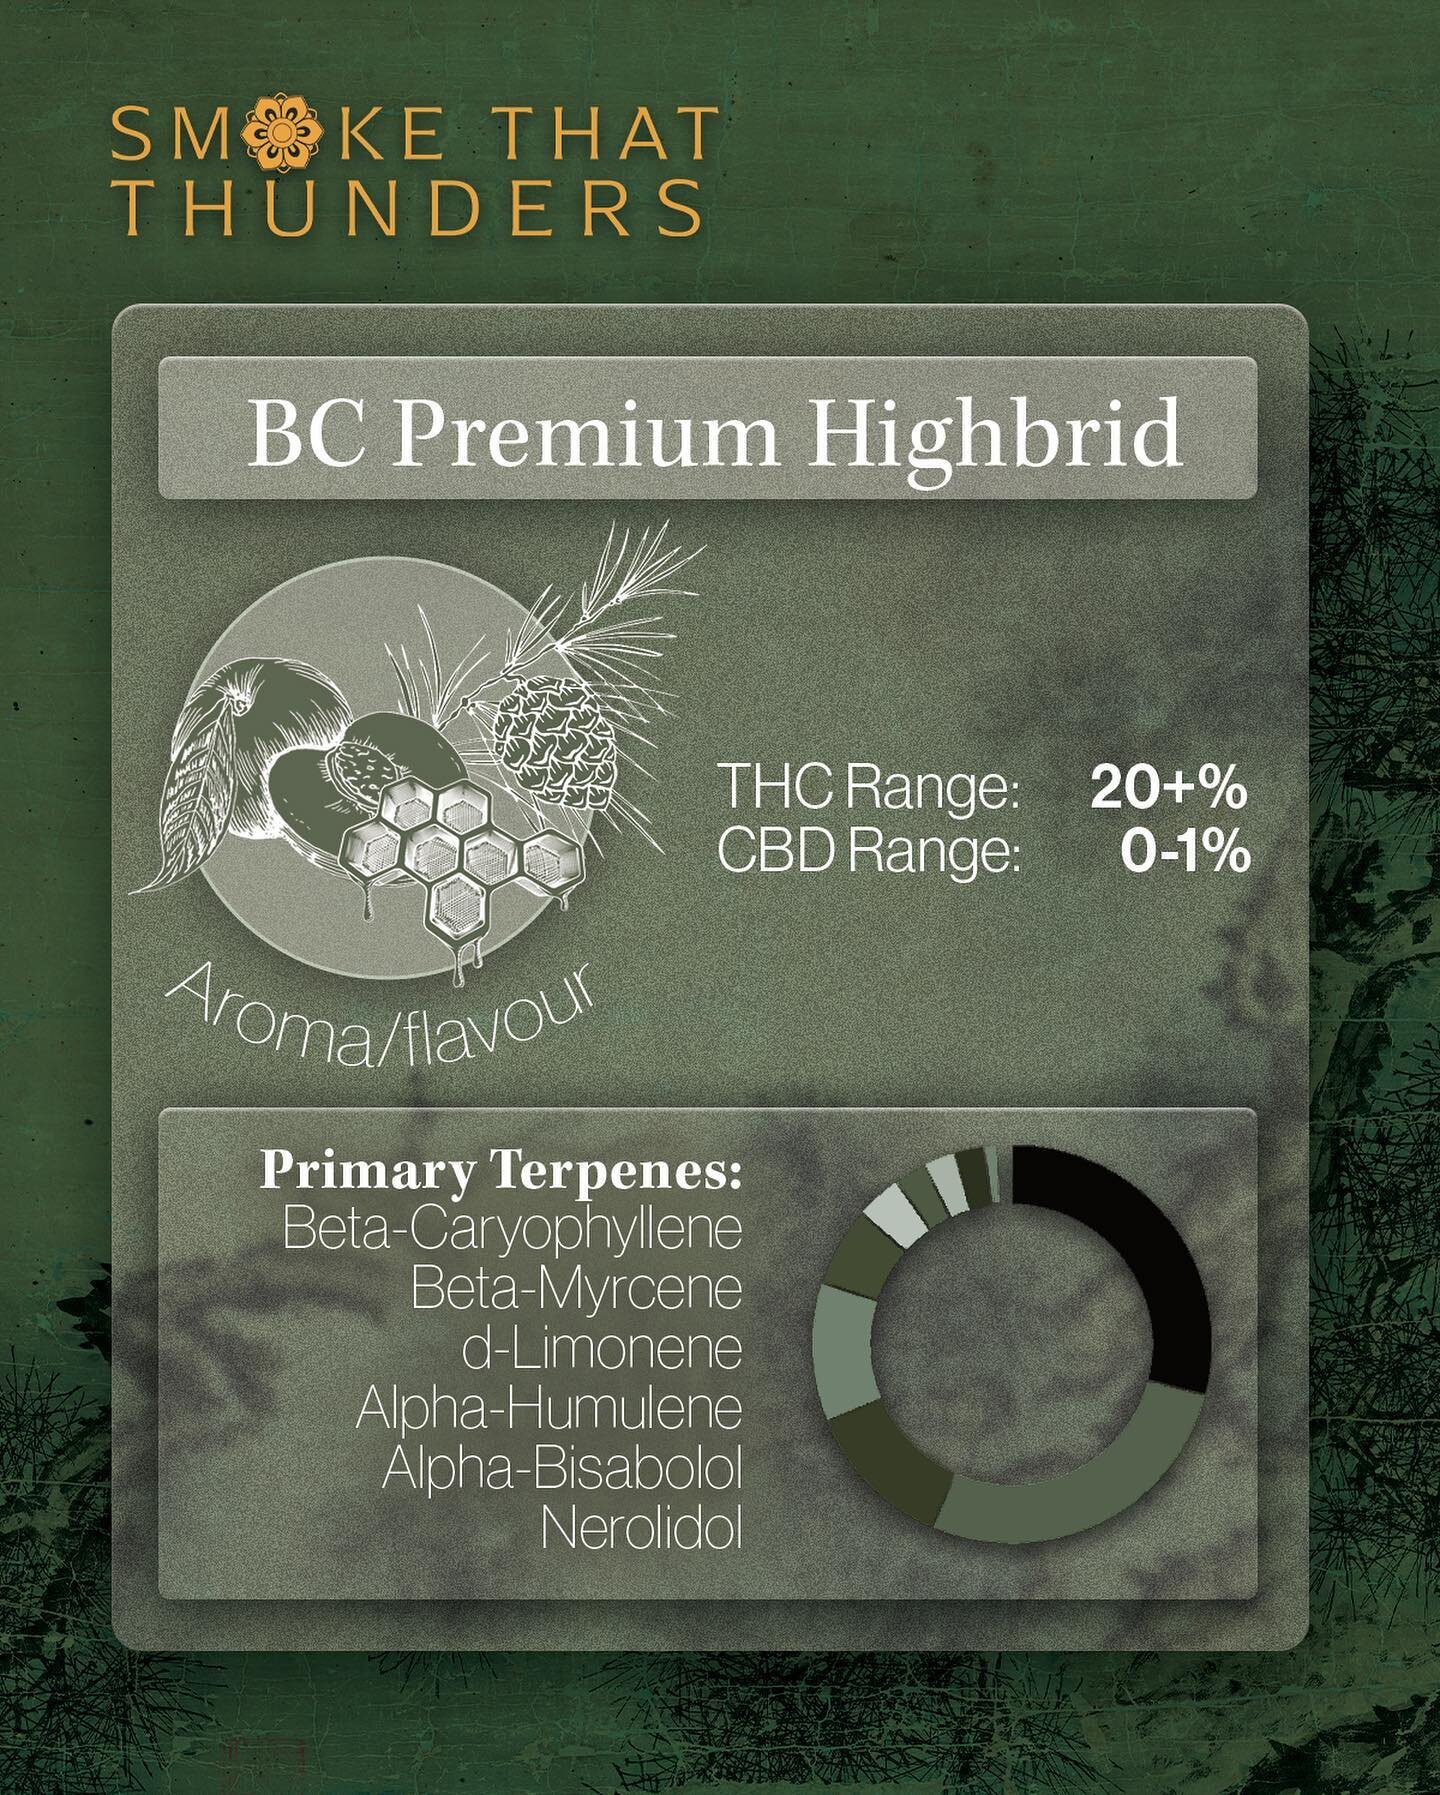 You know the drill! @thcsmokethatthunders BC Premium Highbrid - keep an eye out!